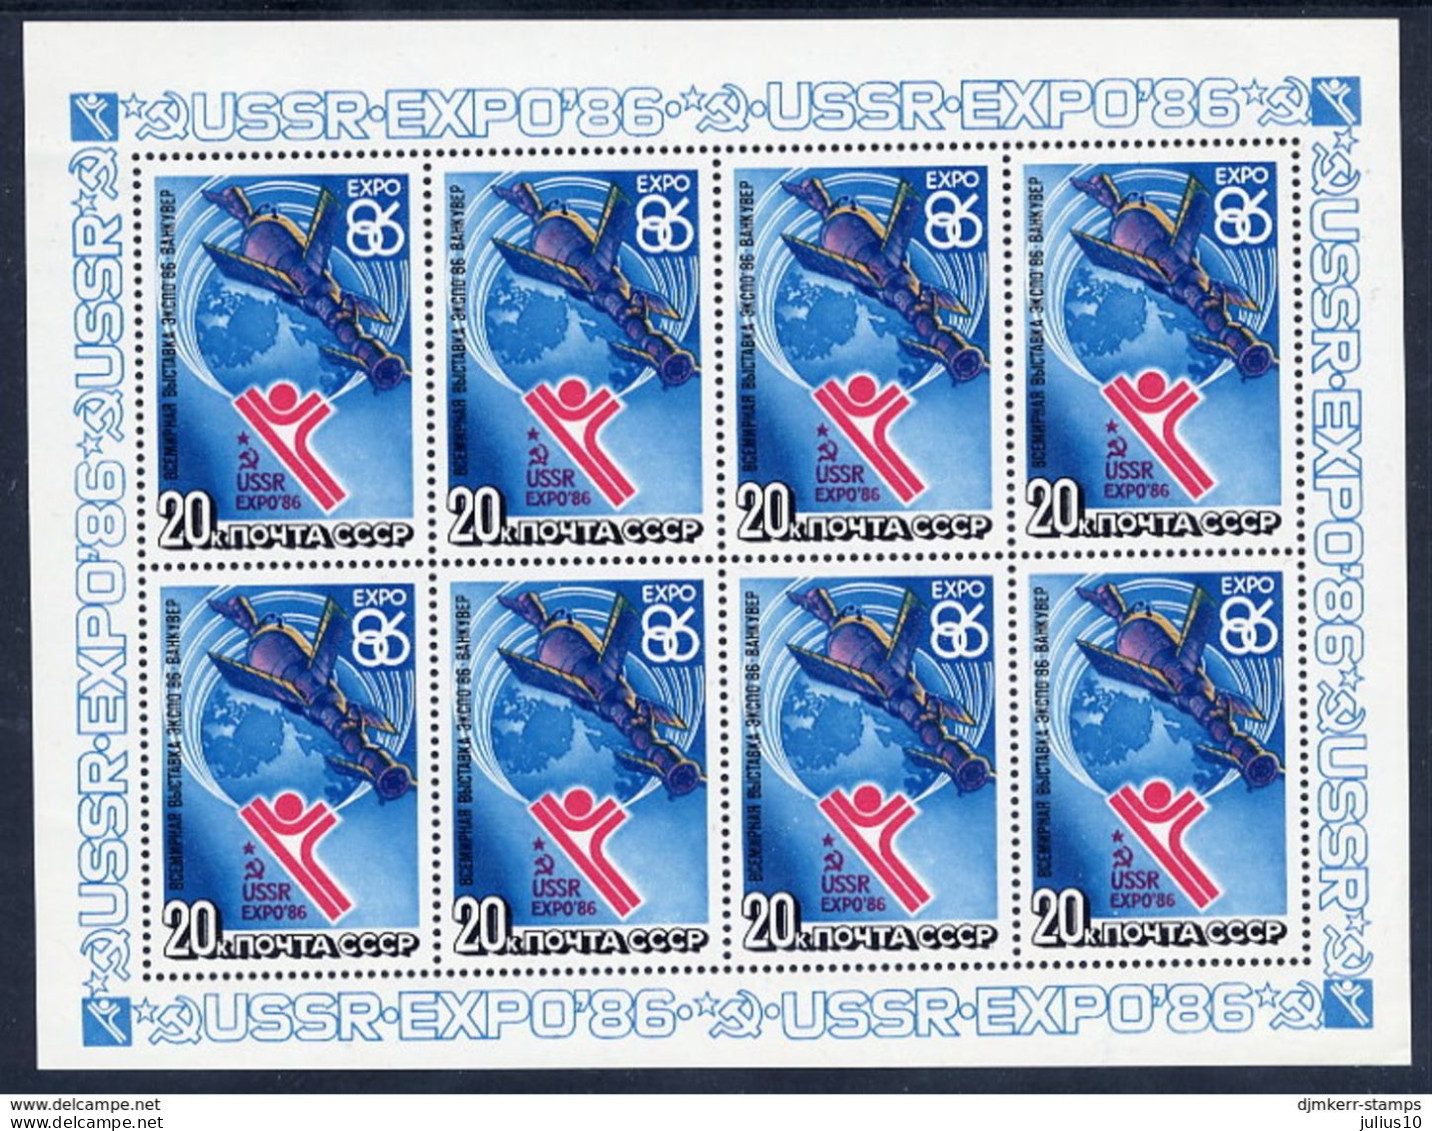 RUSSIA USSR 1986 Space Expo MNH(**) Mi 5589 - Russia & USSR